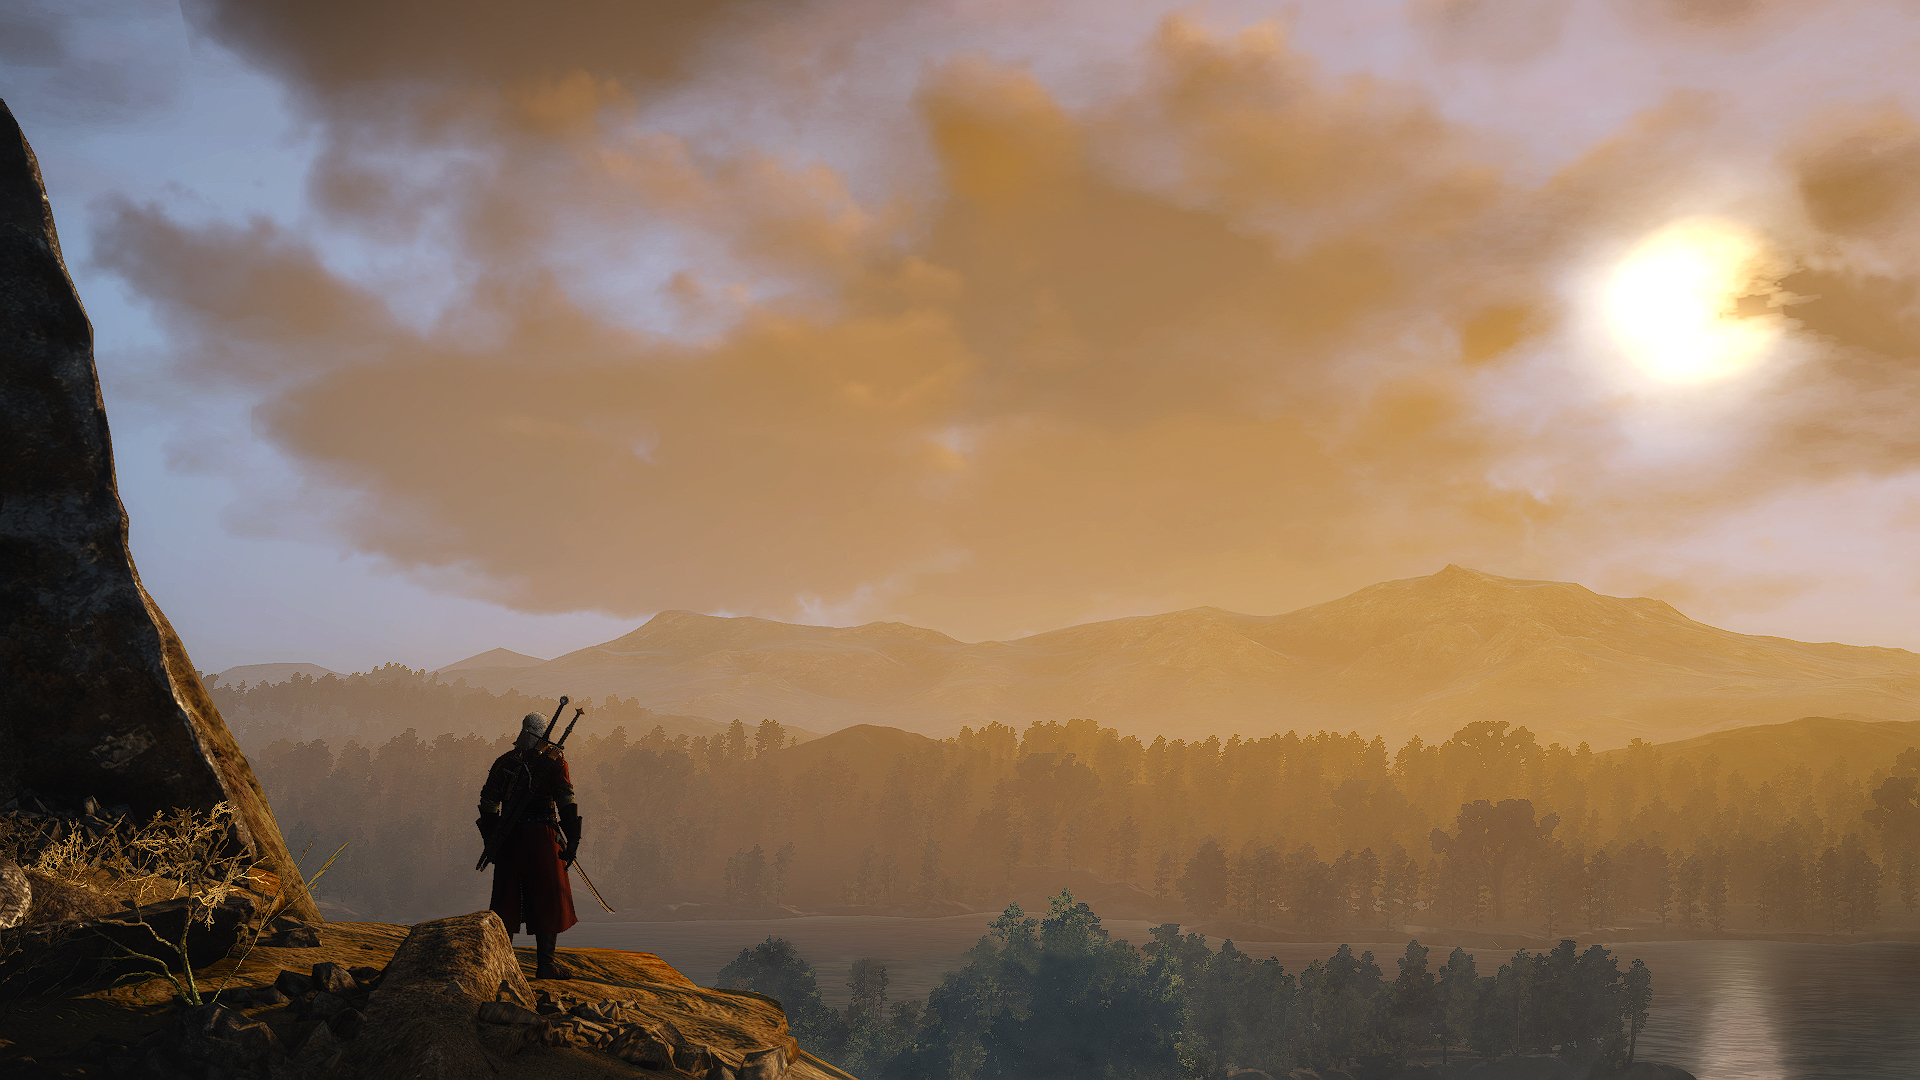 Video Game The Witcher 3: Wild Hunt HD Wallpaper | Background Image